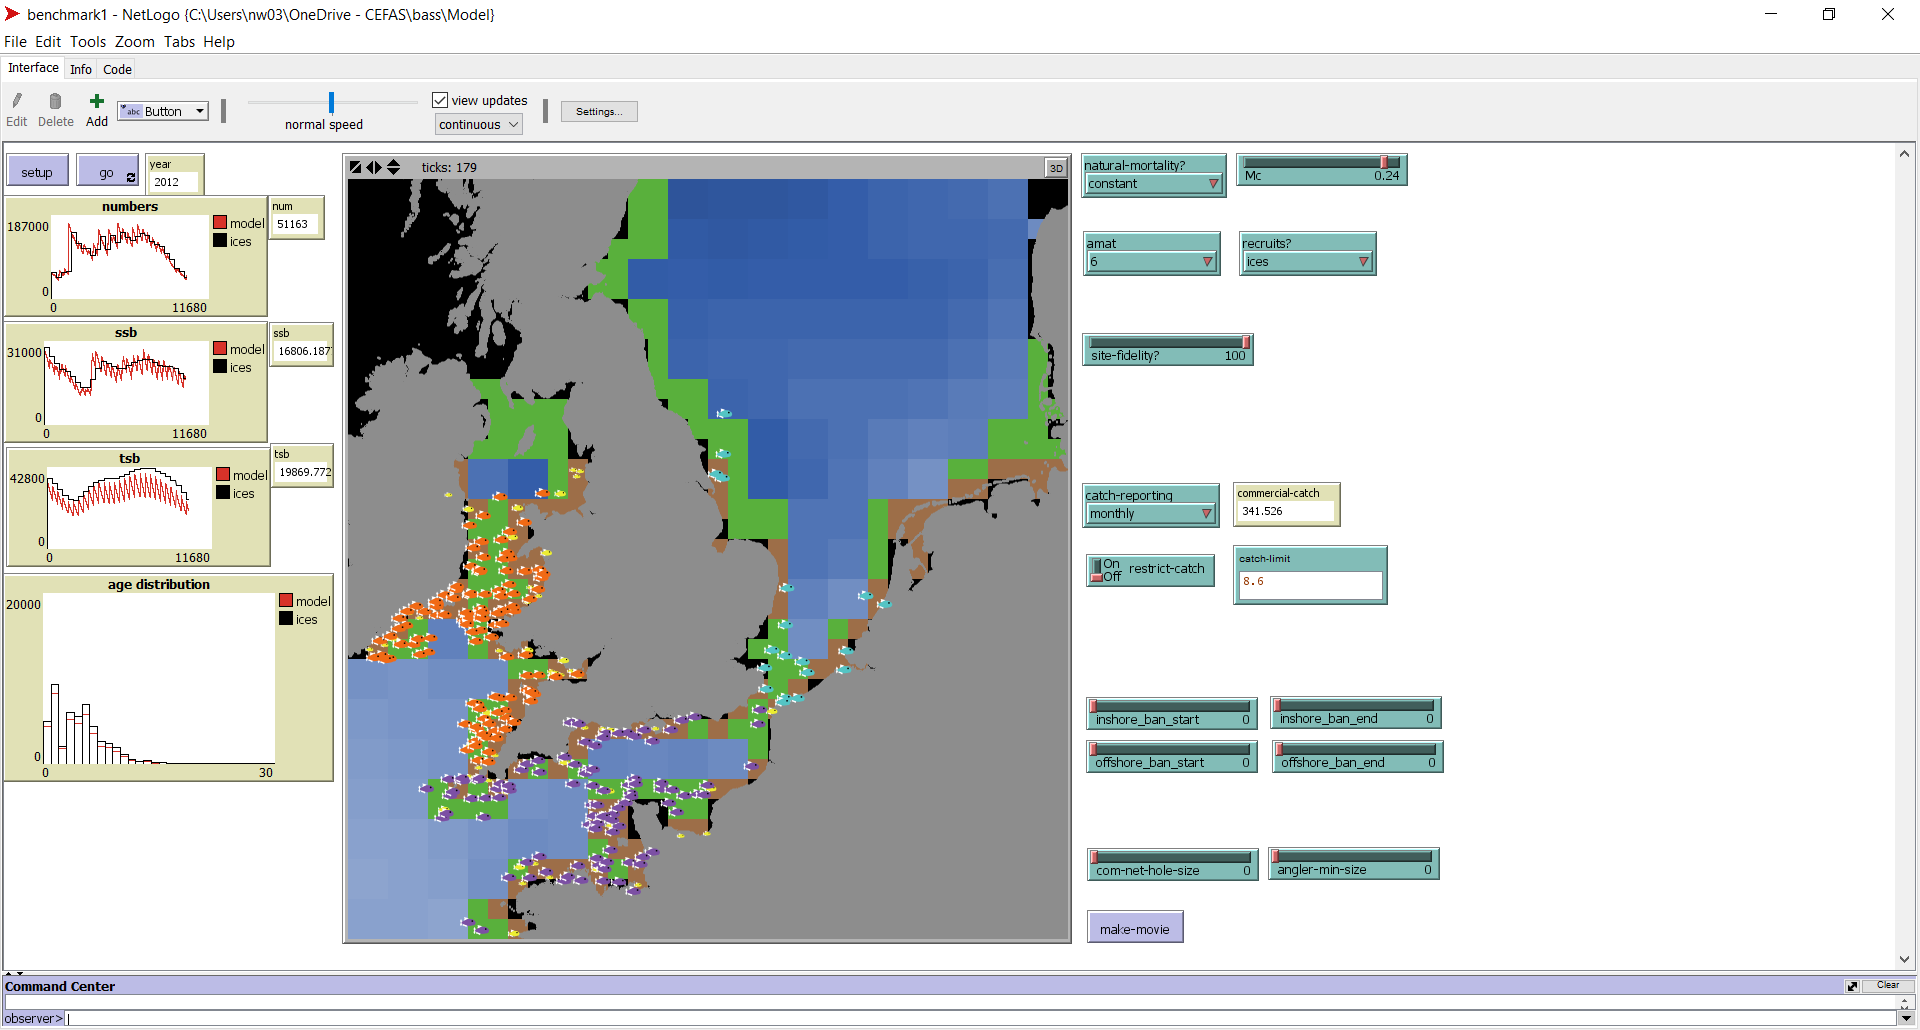 Screenshot of a spatially-explicit IBM for modelling a stock of sea bass.